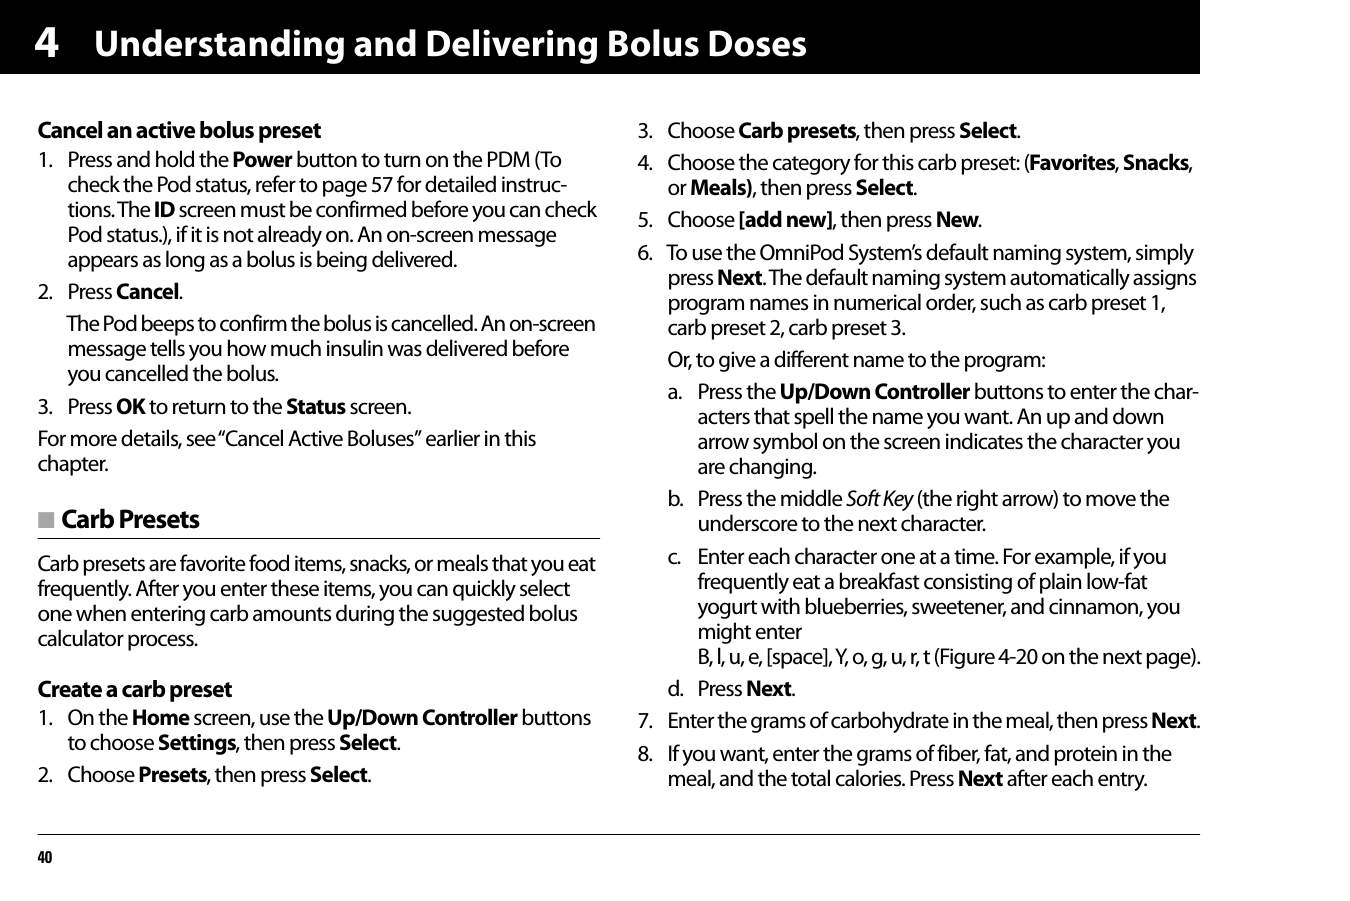 Understanding and Delivering Bolus Doses404Cancel an active bolus preset1. Press and hold the Power button to turn on the PDM (To check the Pod status, refer to page 57 for detailed instruc-tions. The ID screen must be confirmed before you can check Pod status.), if it is not already on. An on-screen message appears as long as a bolus is being delivered.2. Press Cancel.The Pod beeps to confirm the bolus is cancelled. An on-screen message tells you how much insulin was delivered before you cancelled the bolus.3. Press OK to return to the Status screen.For more details, see “Cancel Active Boluses” earlier in this chapter.n Carb PresetsCarb presets are favorite food items, snacks, or meals that you eat frequently. After you enter these items, you can quickly select one when entering carb amounts during the suggested bolus calculator process.Create a carb preset1. On the Home screen, use the Up/Down Controller buttons to choose Settings, then press Select.2. Choose Presets, then press Select.3. Choose Carb presets, then press Select.4. Choose the category for this carb preset: (Favorites, Snacks, or Meals), then press Select.5. Choose [add new], then press New.6. To use the OmniPod System’s default naming system, simply press Next. The default naming system automatically assigns program names in numerical order, such as carb preset 1, carb preset 2, carb preset 3.Or, to give a different name to the program:a. Press the Up/Down Controller buttons to enter the char-acters that spell the name you want. An up and down arrow symbol on the screen indicates the character you are changing.b. Press the middle Soft Key (the right arrow) to move the underscore to the next character.c. Enter each character one at a time. For example, if you frequently eat a breakfast consisting of plain low-fat yogurt with blueberries, sweetener, and cinnamon, you might enter B, l, u, e, [space], Y, o, g, u, r, t (Figure 4-20 on the next page).d. Press Next.7. Enter the grams of carbohydrate in the meal, then press Next.8. If you want, enter the grams of fiber, fat, and protein in the meal, and the total calories. Press Next after each entry. 